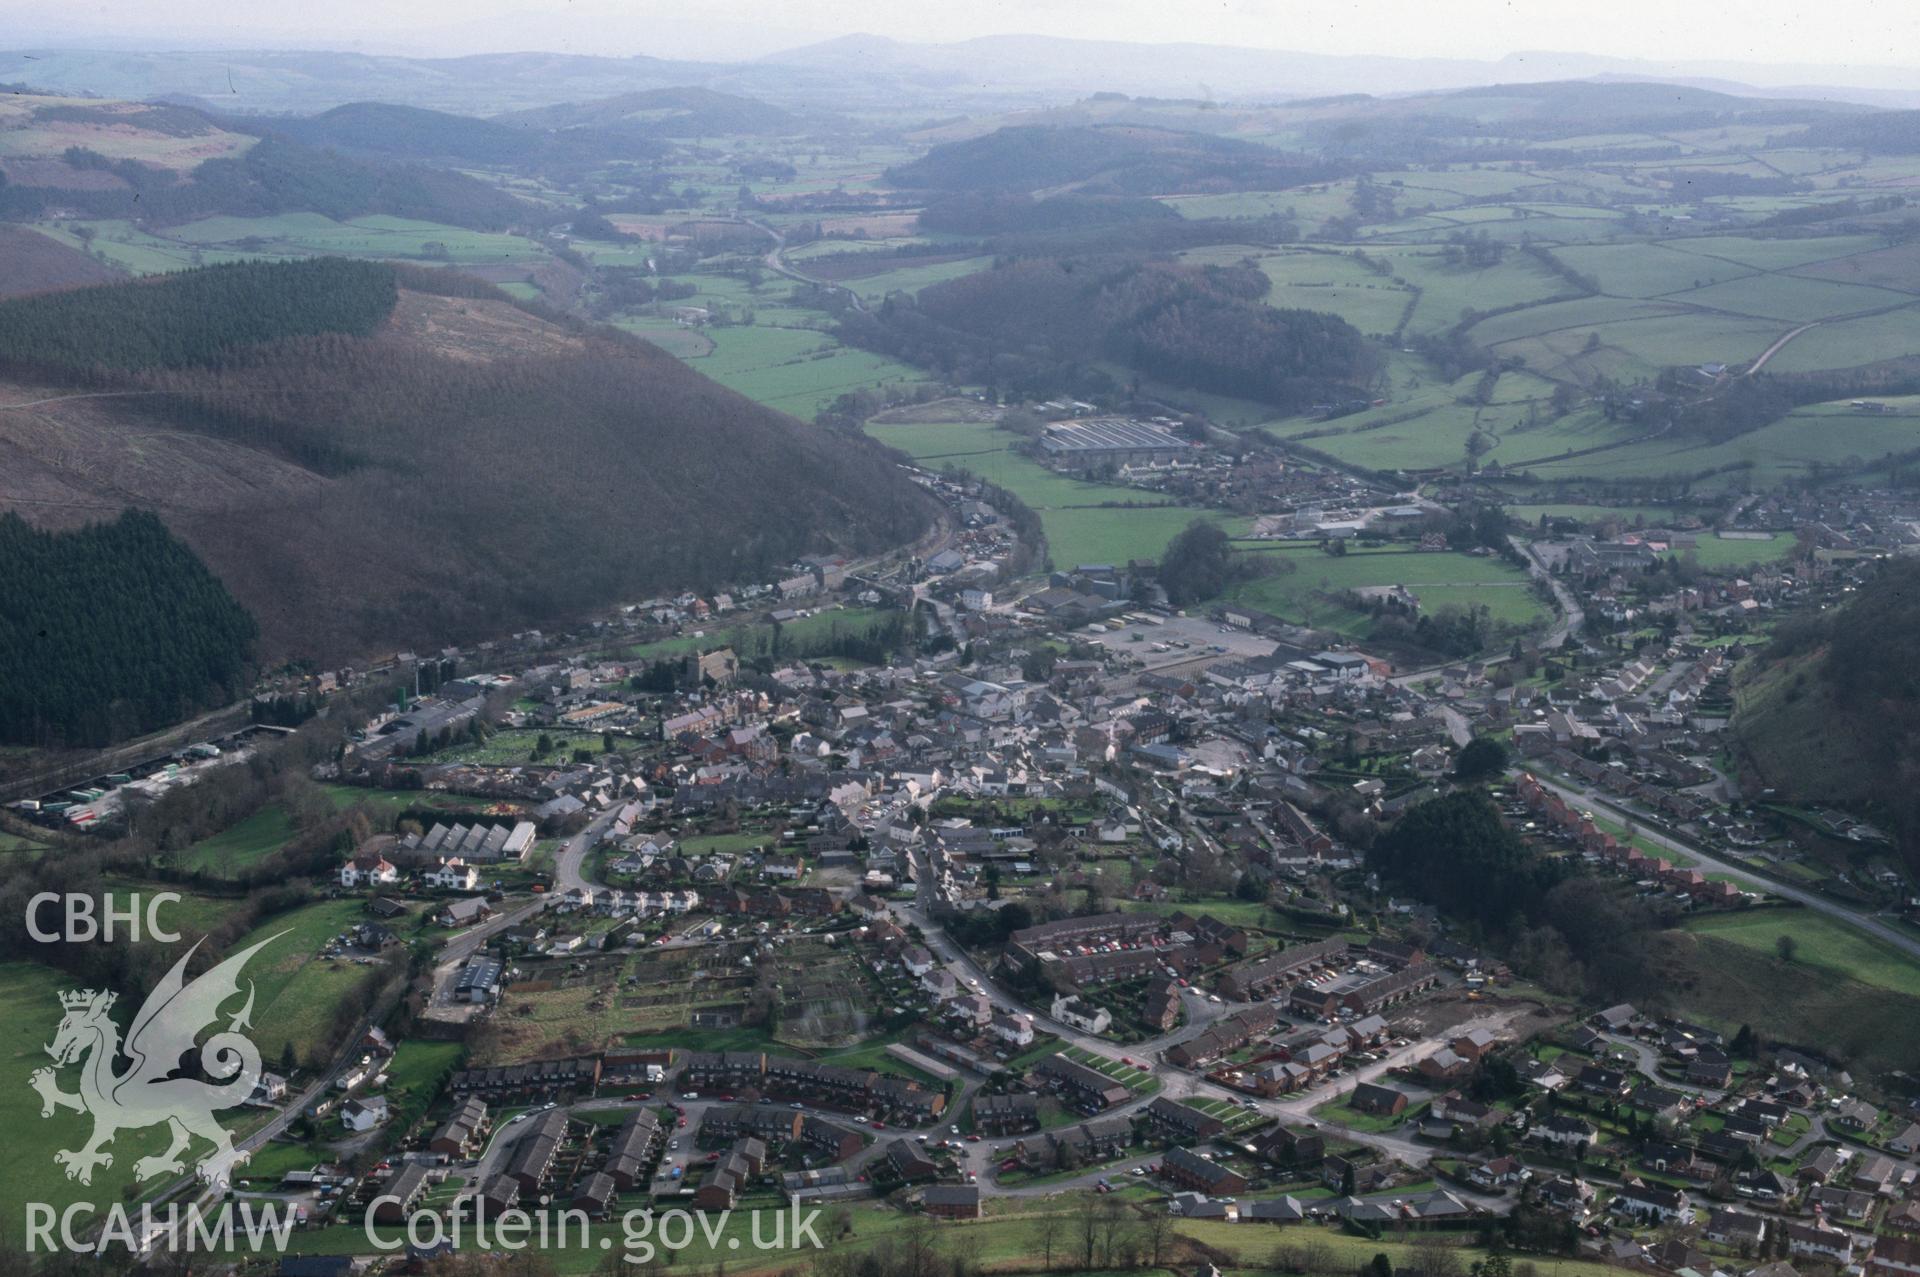 Slide of RCAHMW colour oblique aerial photograph of Knighton, taken by C.R. Musson, 14/3/1999.